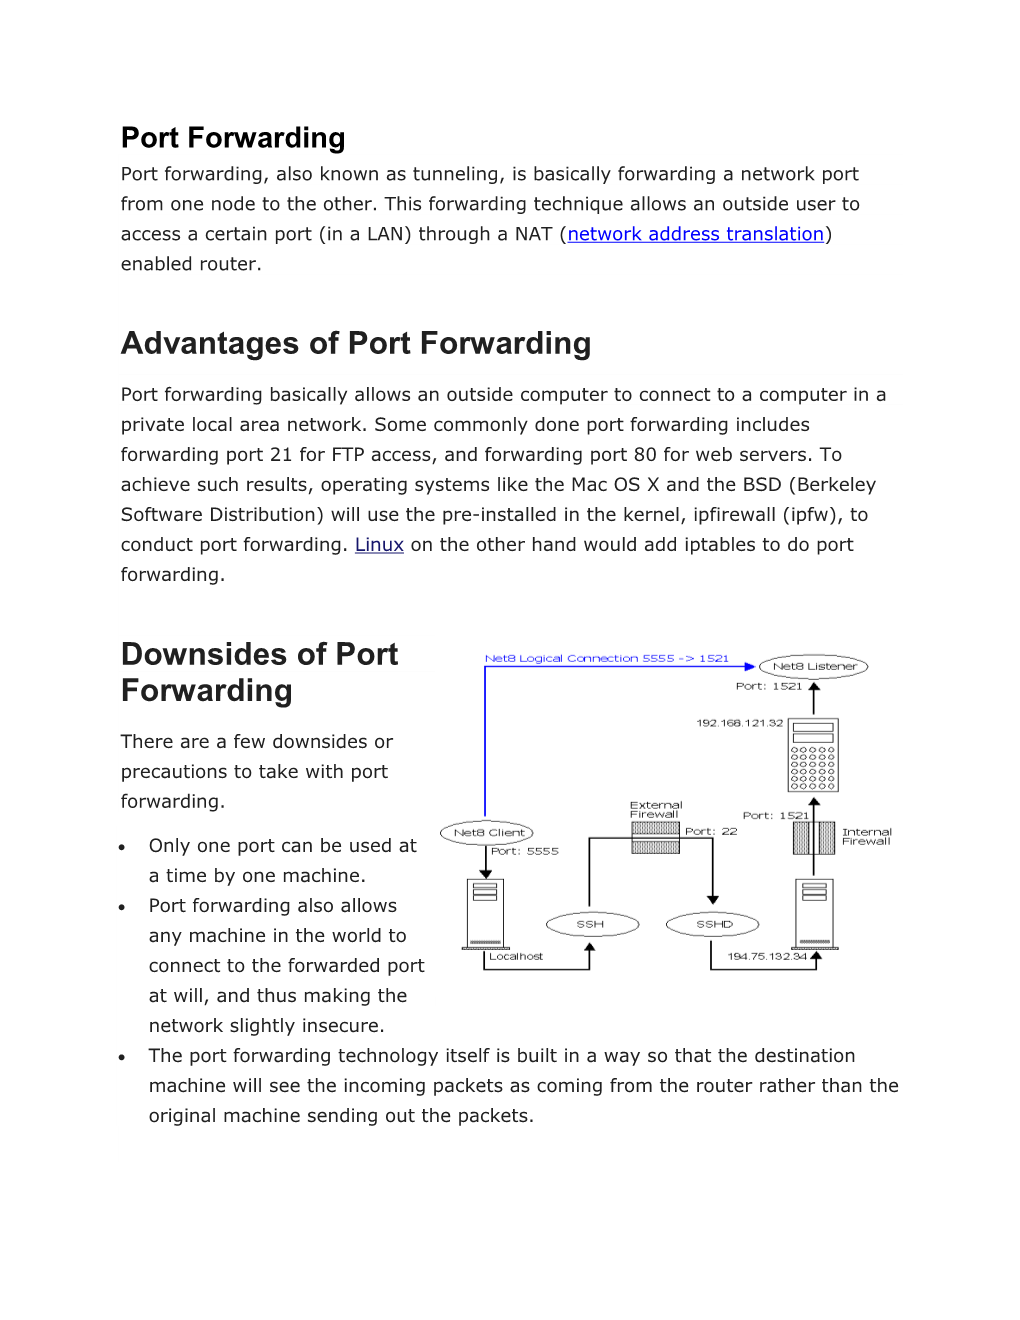 Port Forwarding Port Forwarding, Also Known As Tunneling, Is Basically Forwarding a Network Port from One Node to the Other